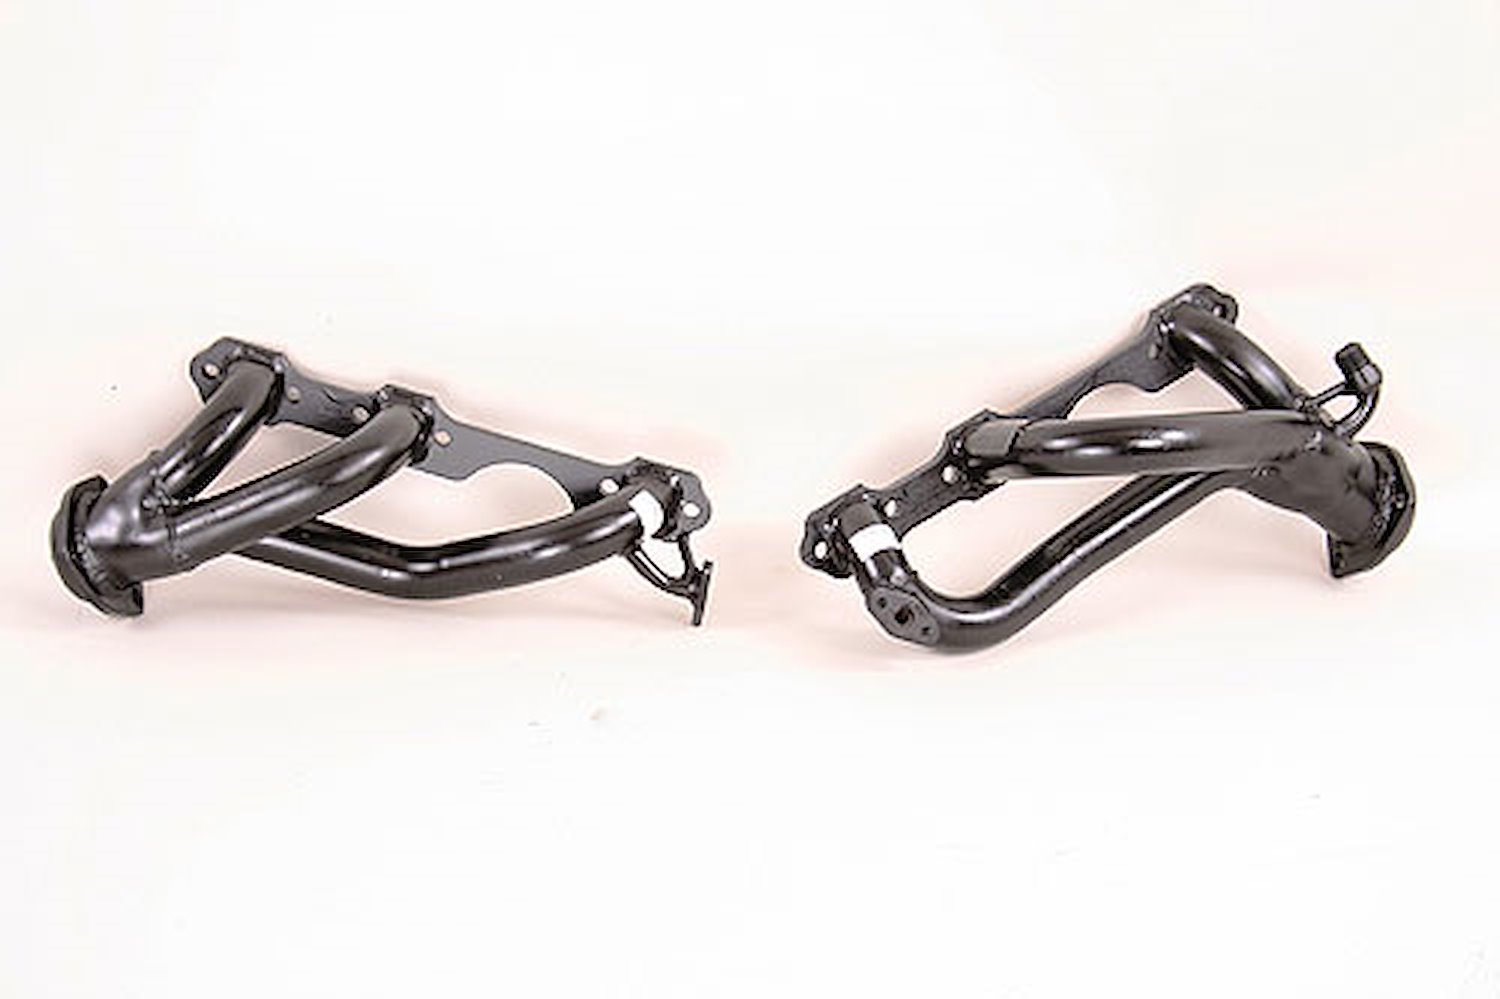 Painted Truck Headers 1996-2001 Chevy/GMC S10/S15 2WD 4.3L